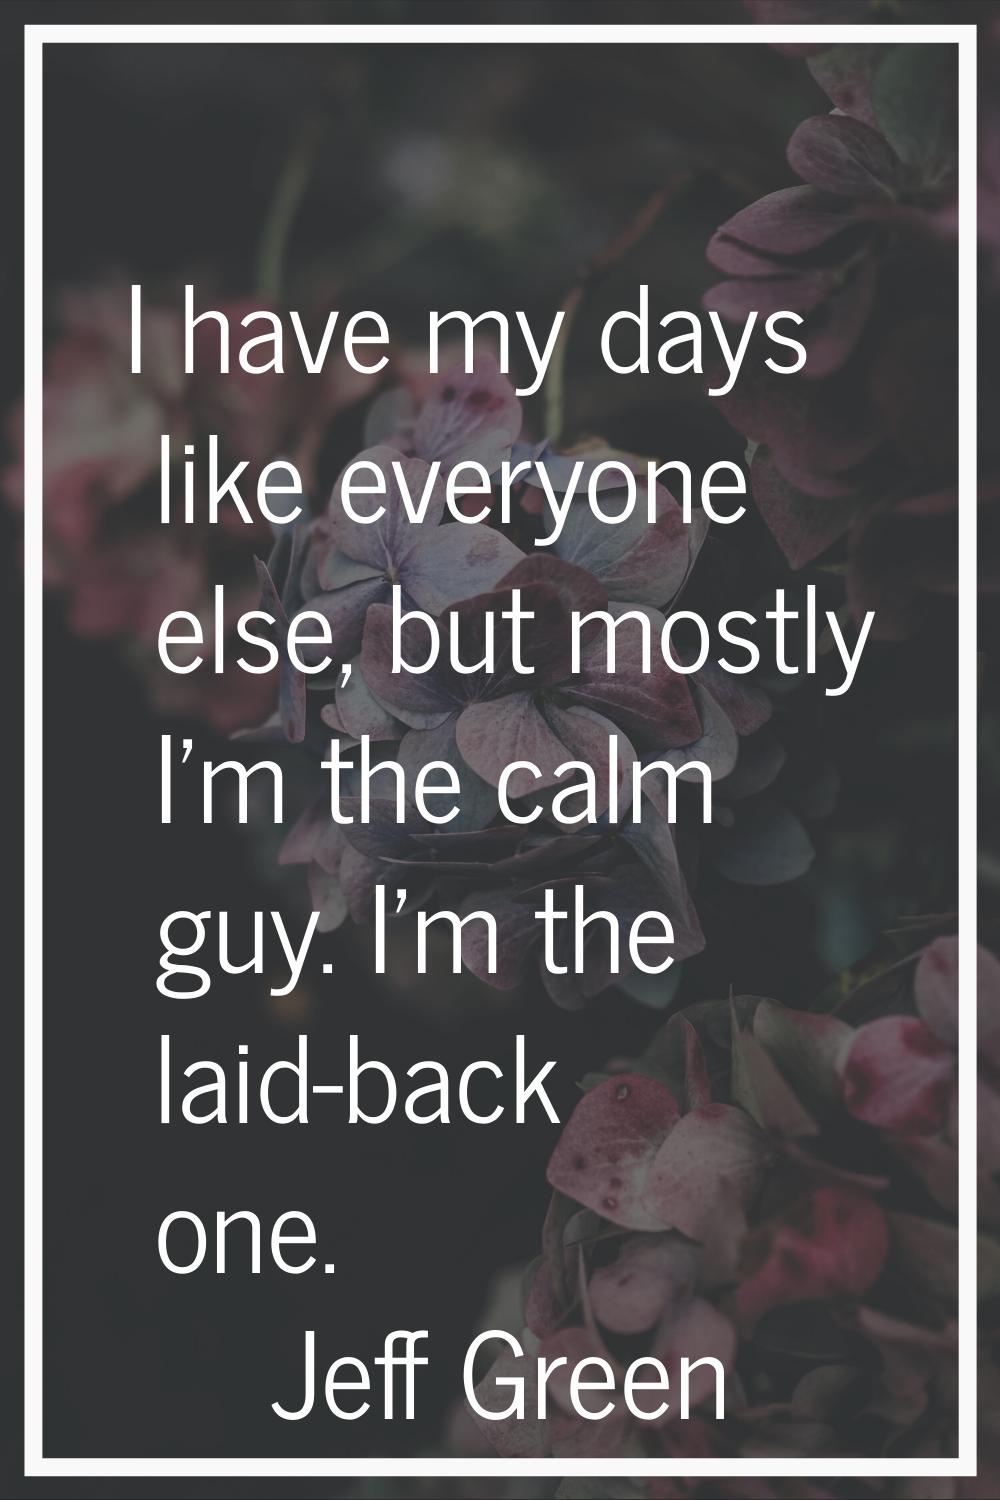 I have my days like everyone else, but mostly I'm the calm guy. I'm the laid-back one.